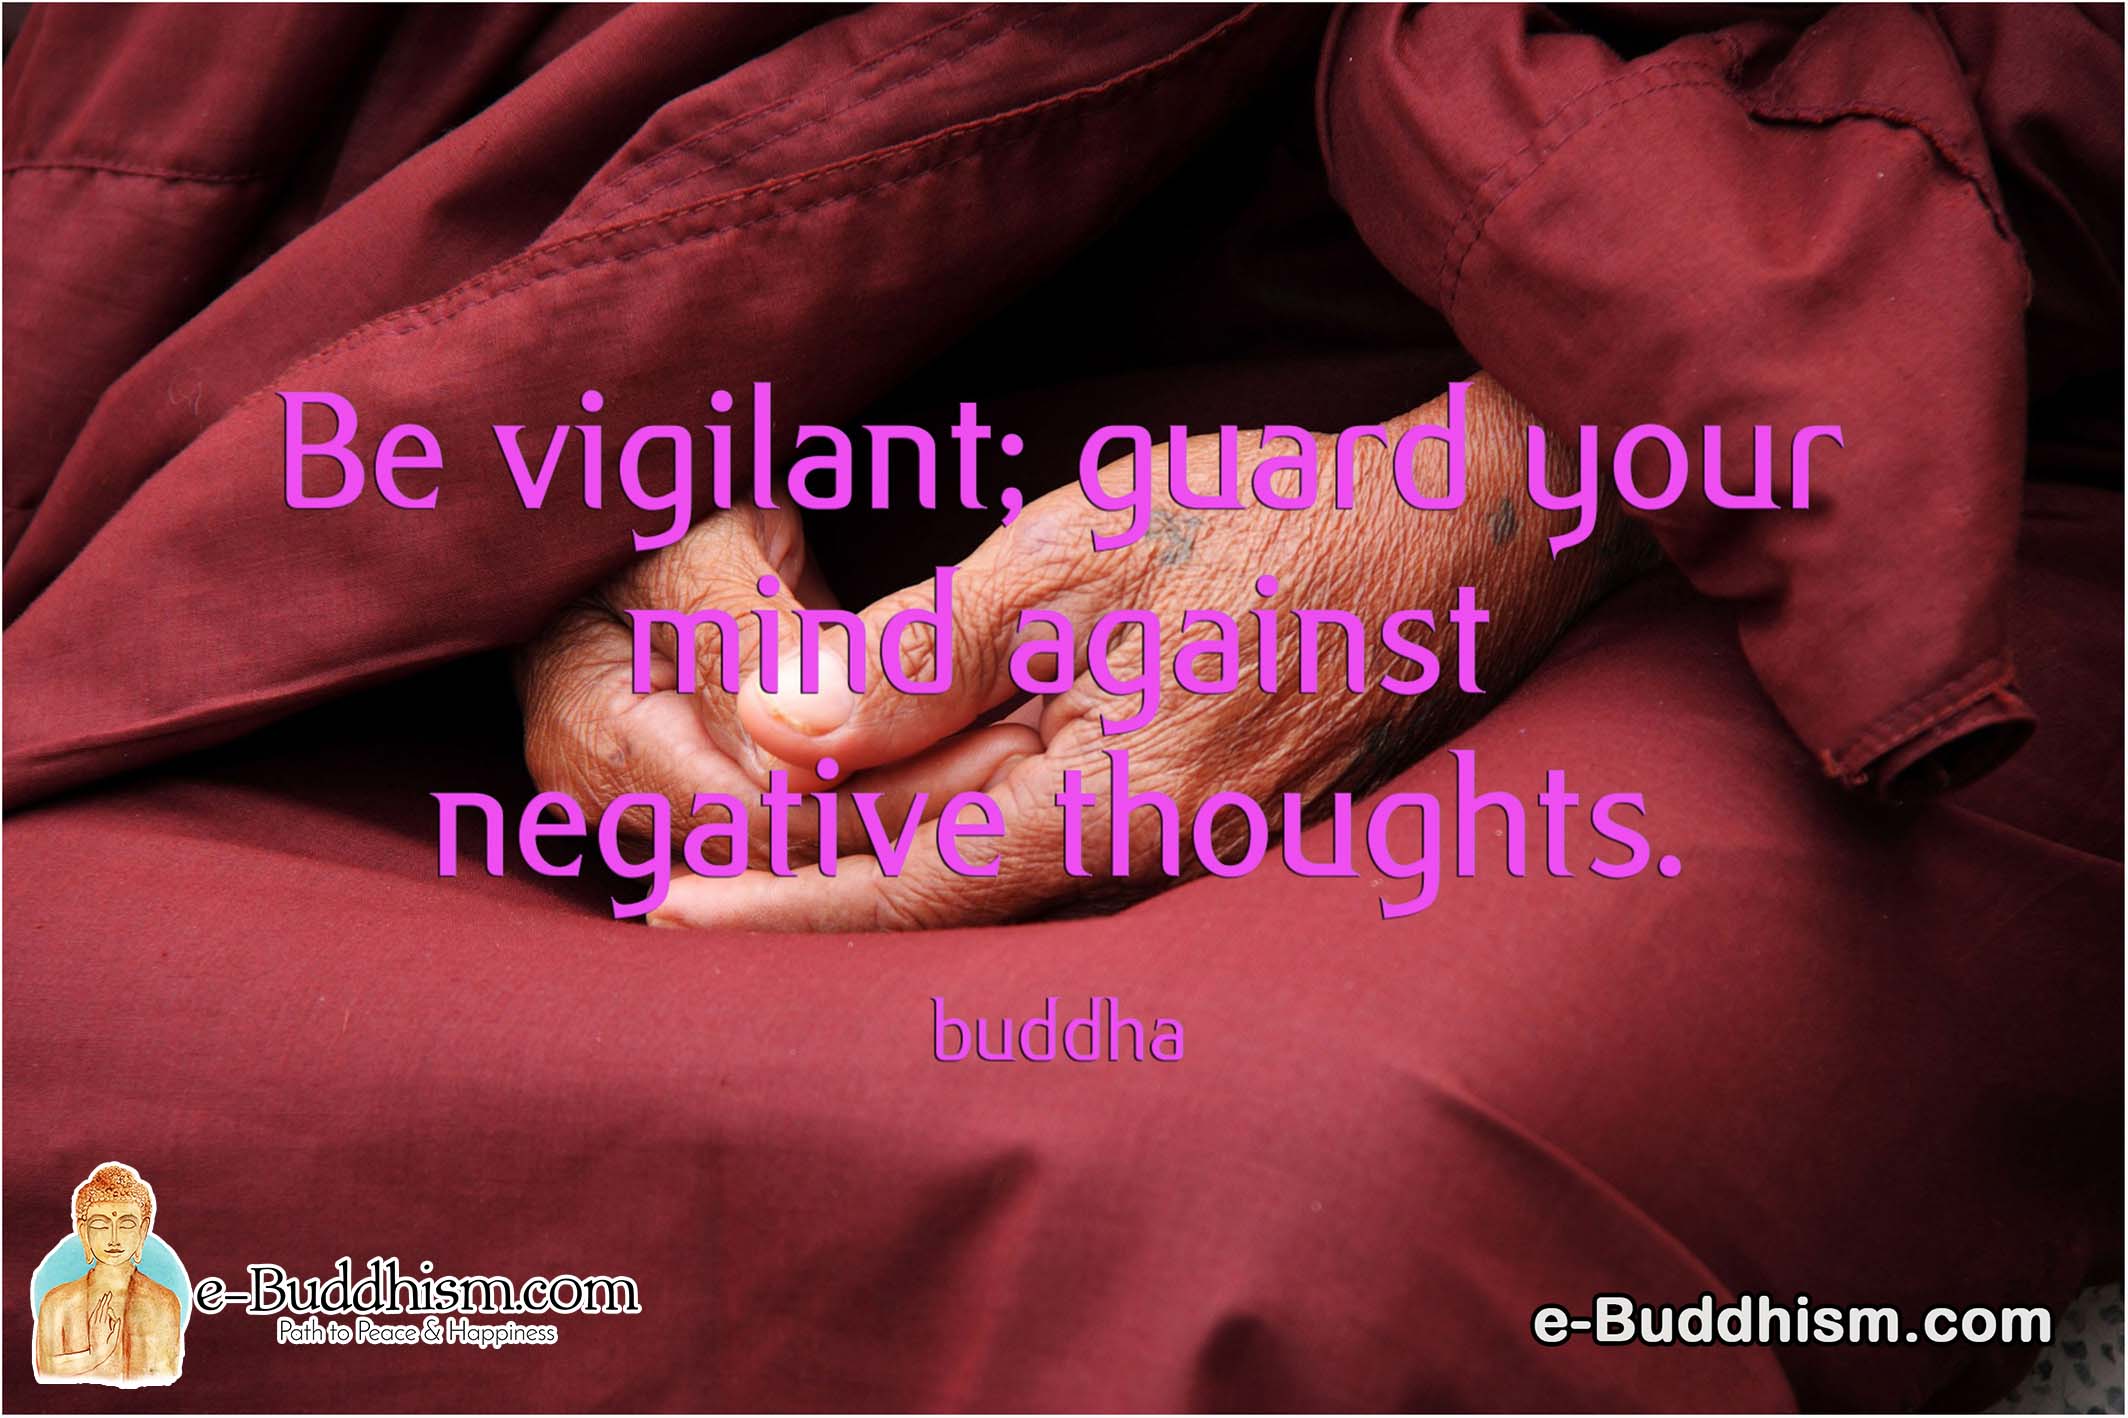 Be vigilant, and guard your mind against negative thoughts. -Buddha